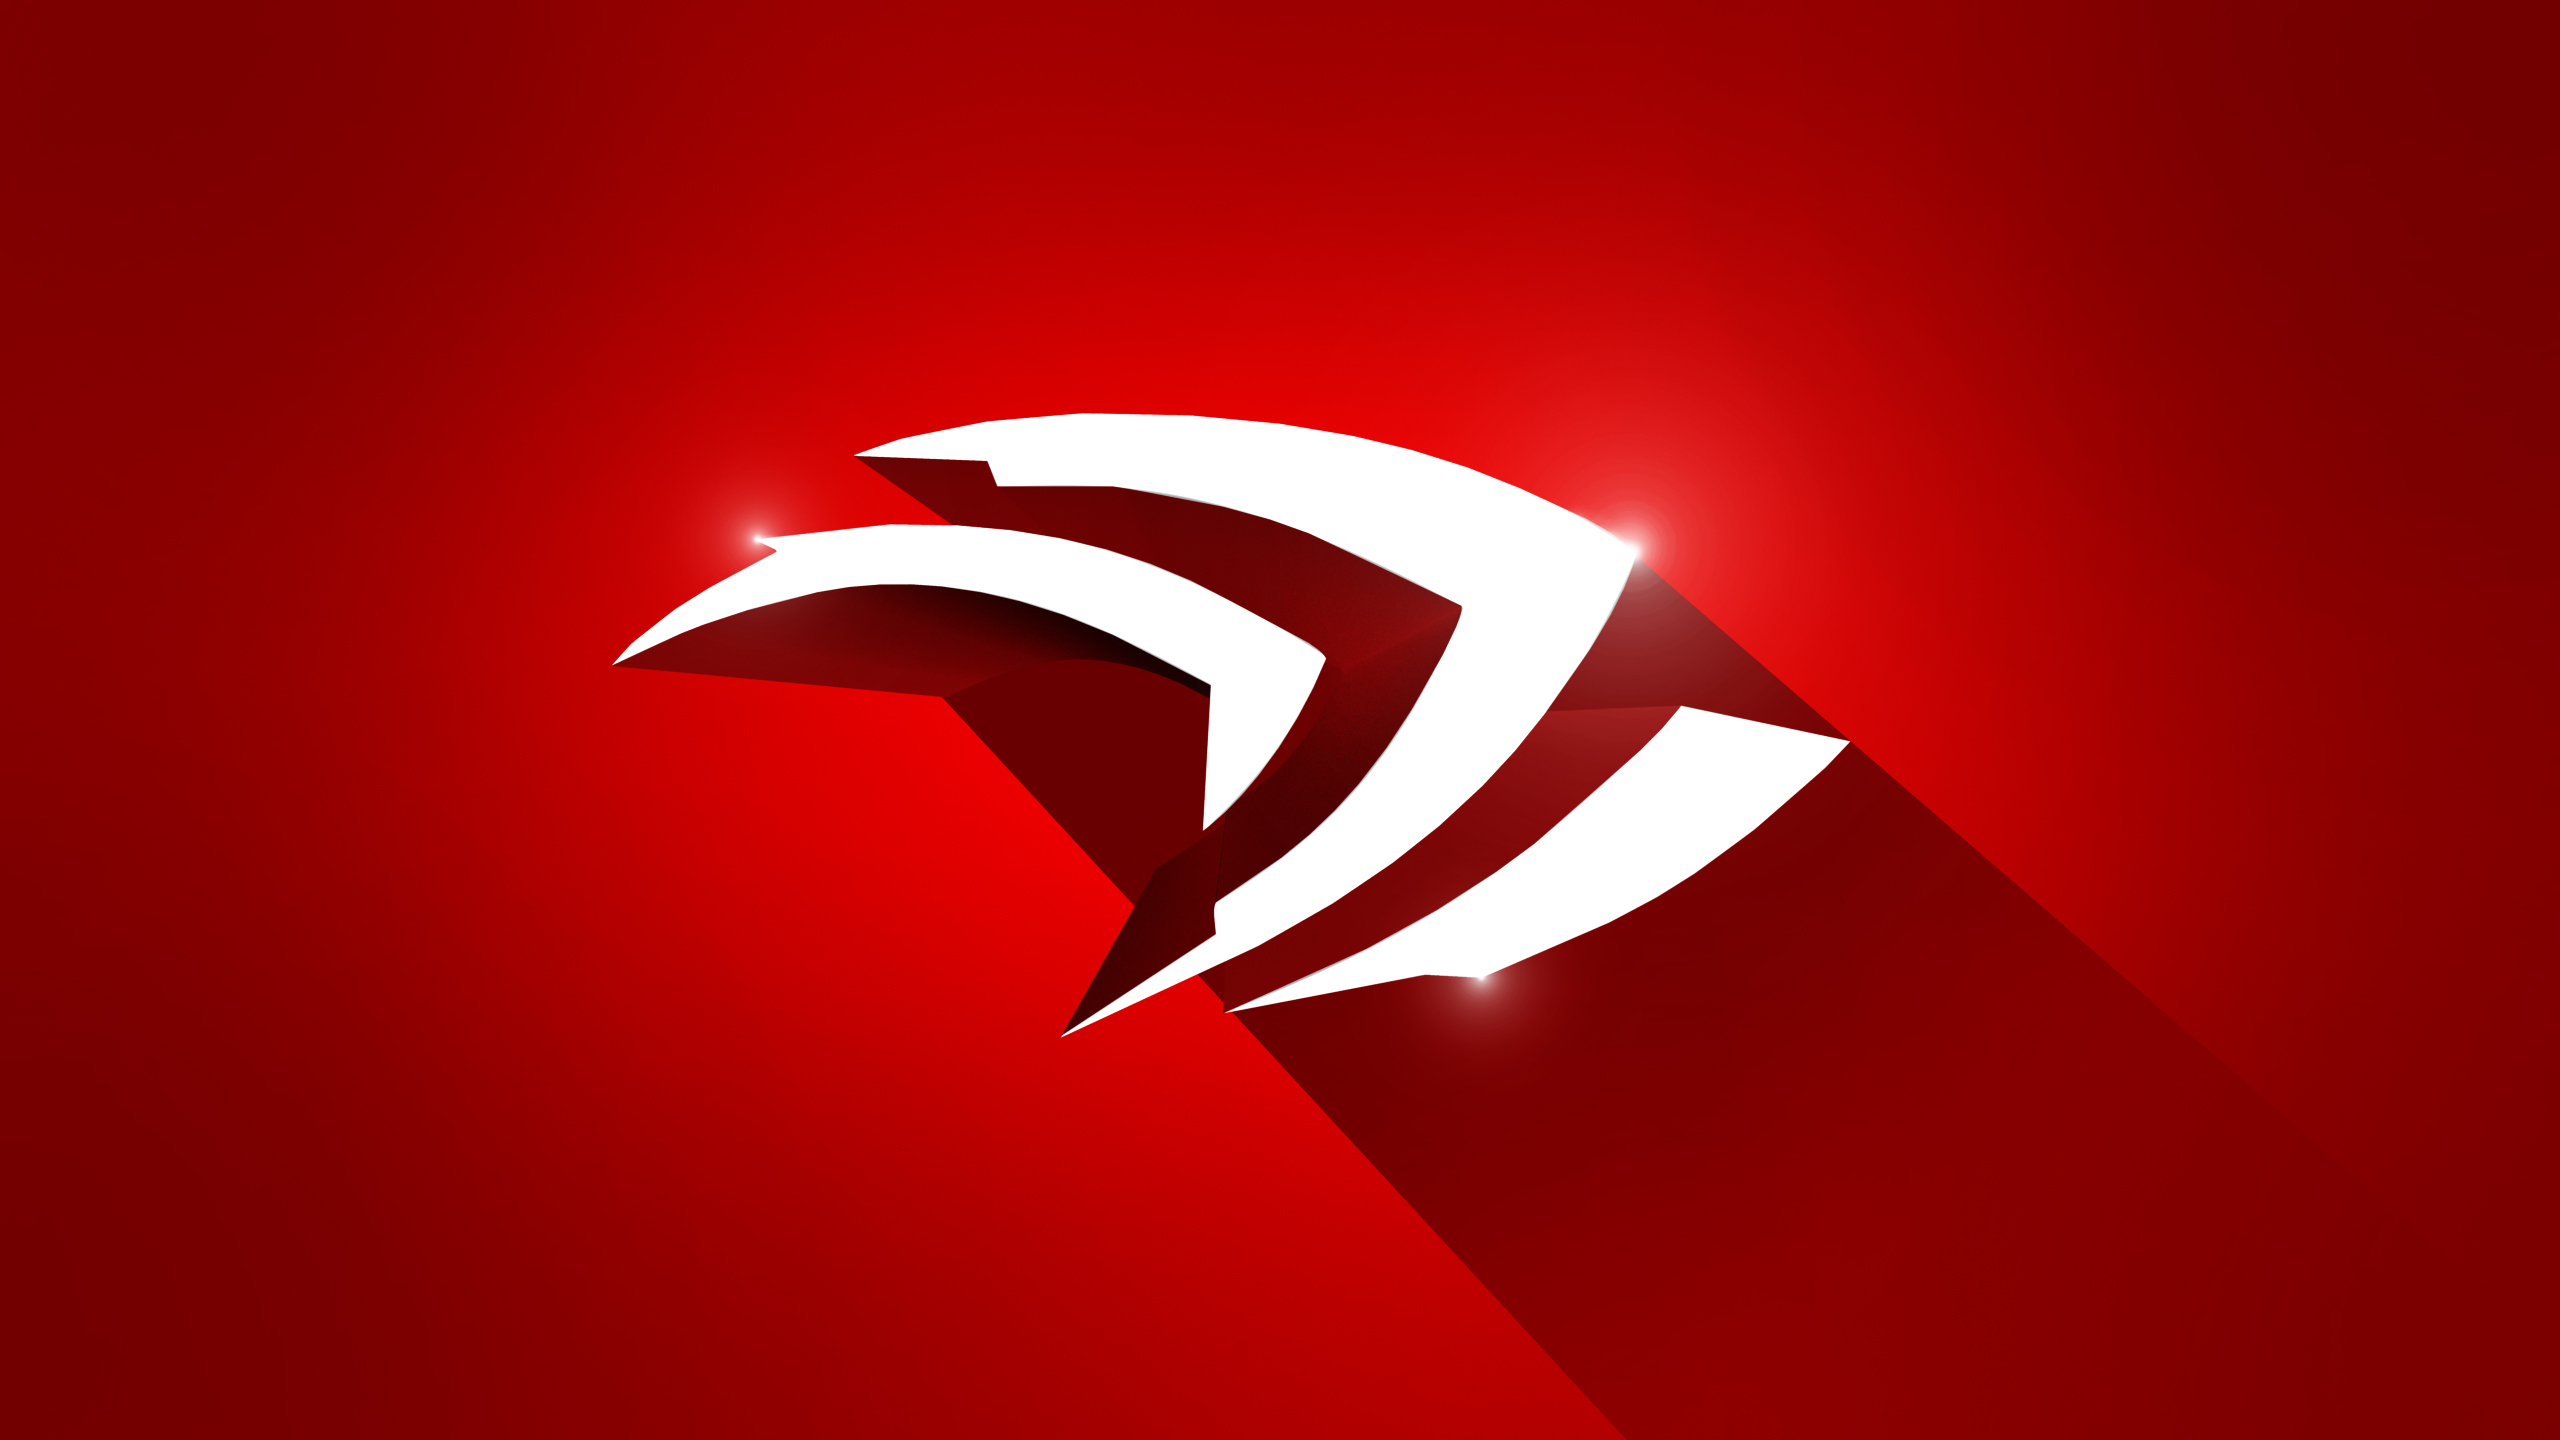 Nvidia Red Shadow Hd Wallpaper Background Image 2560x1440